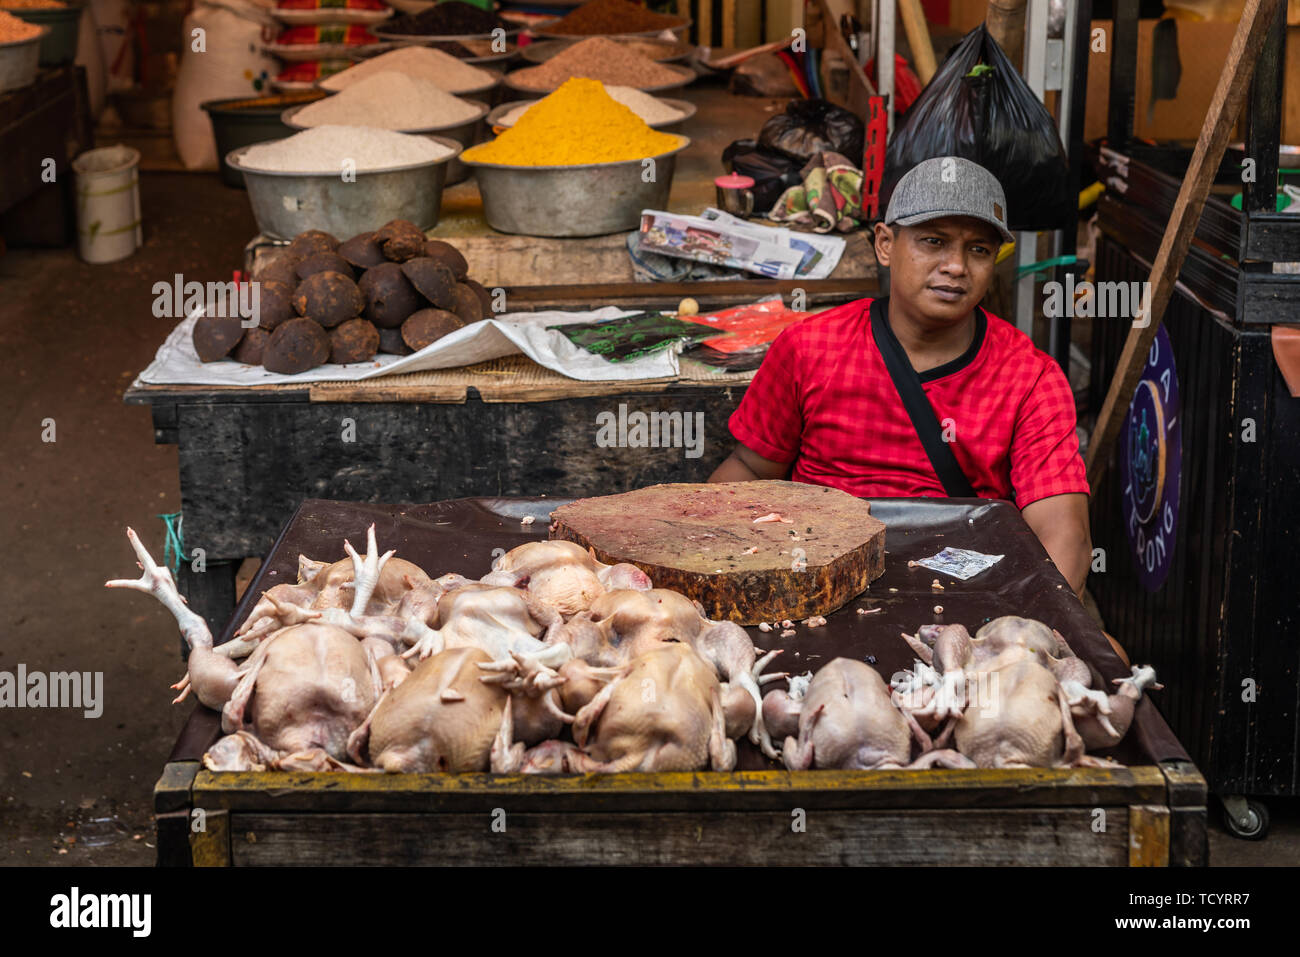 Makassar, Sulawesi, Indonesia - February 28, 2019: Terong Street Market. Ambulant vendor in red sells dead clean but whole chickens without head and f Stock Photo